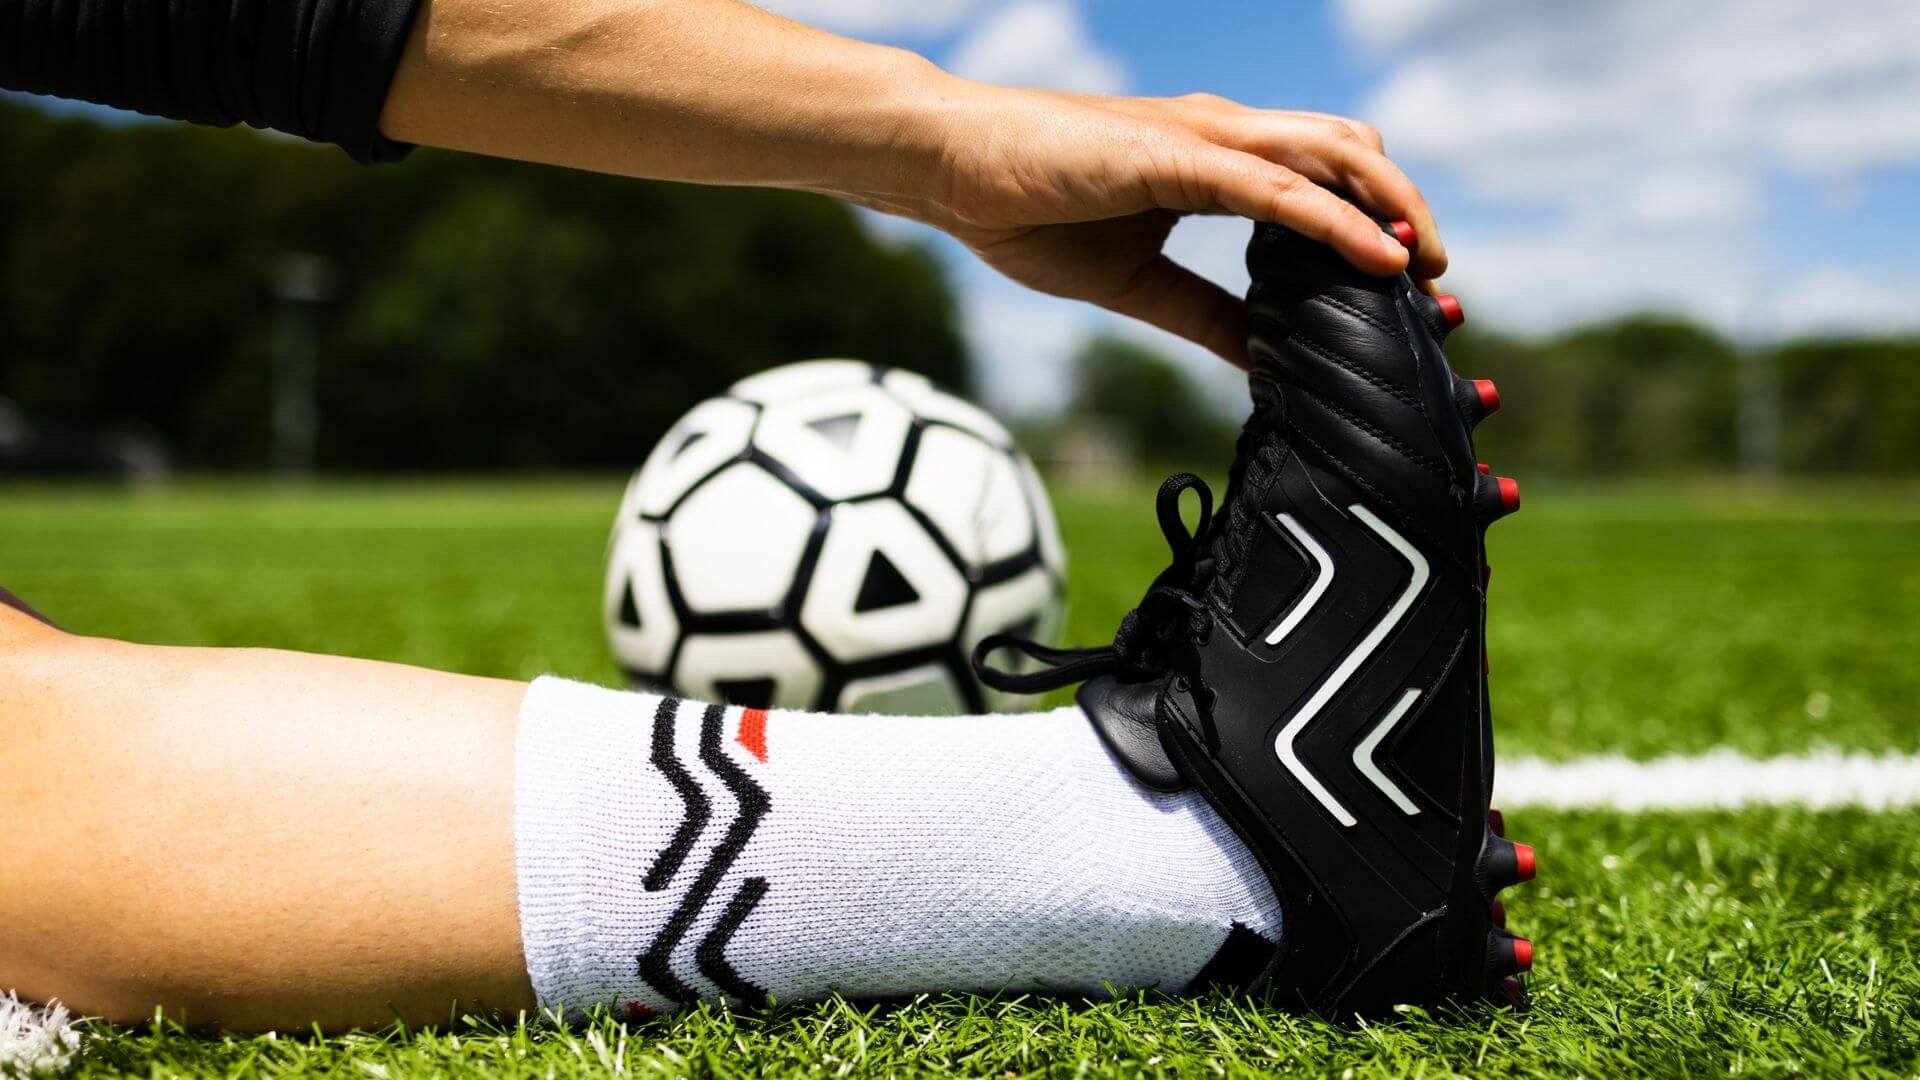 Ida Sports has create the first female-specific cleat